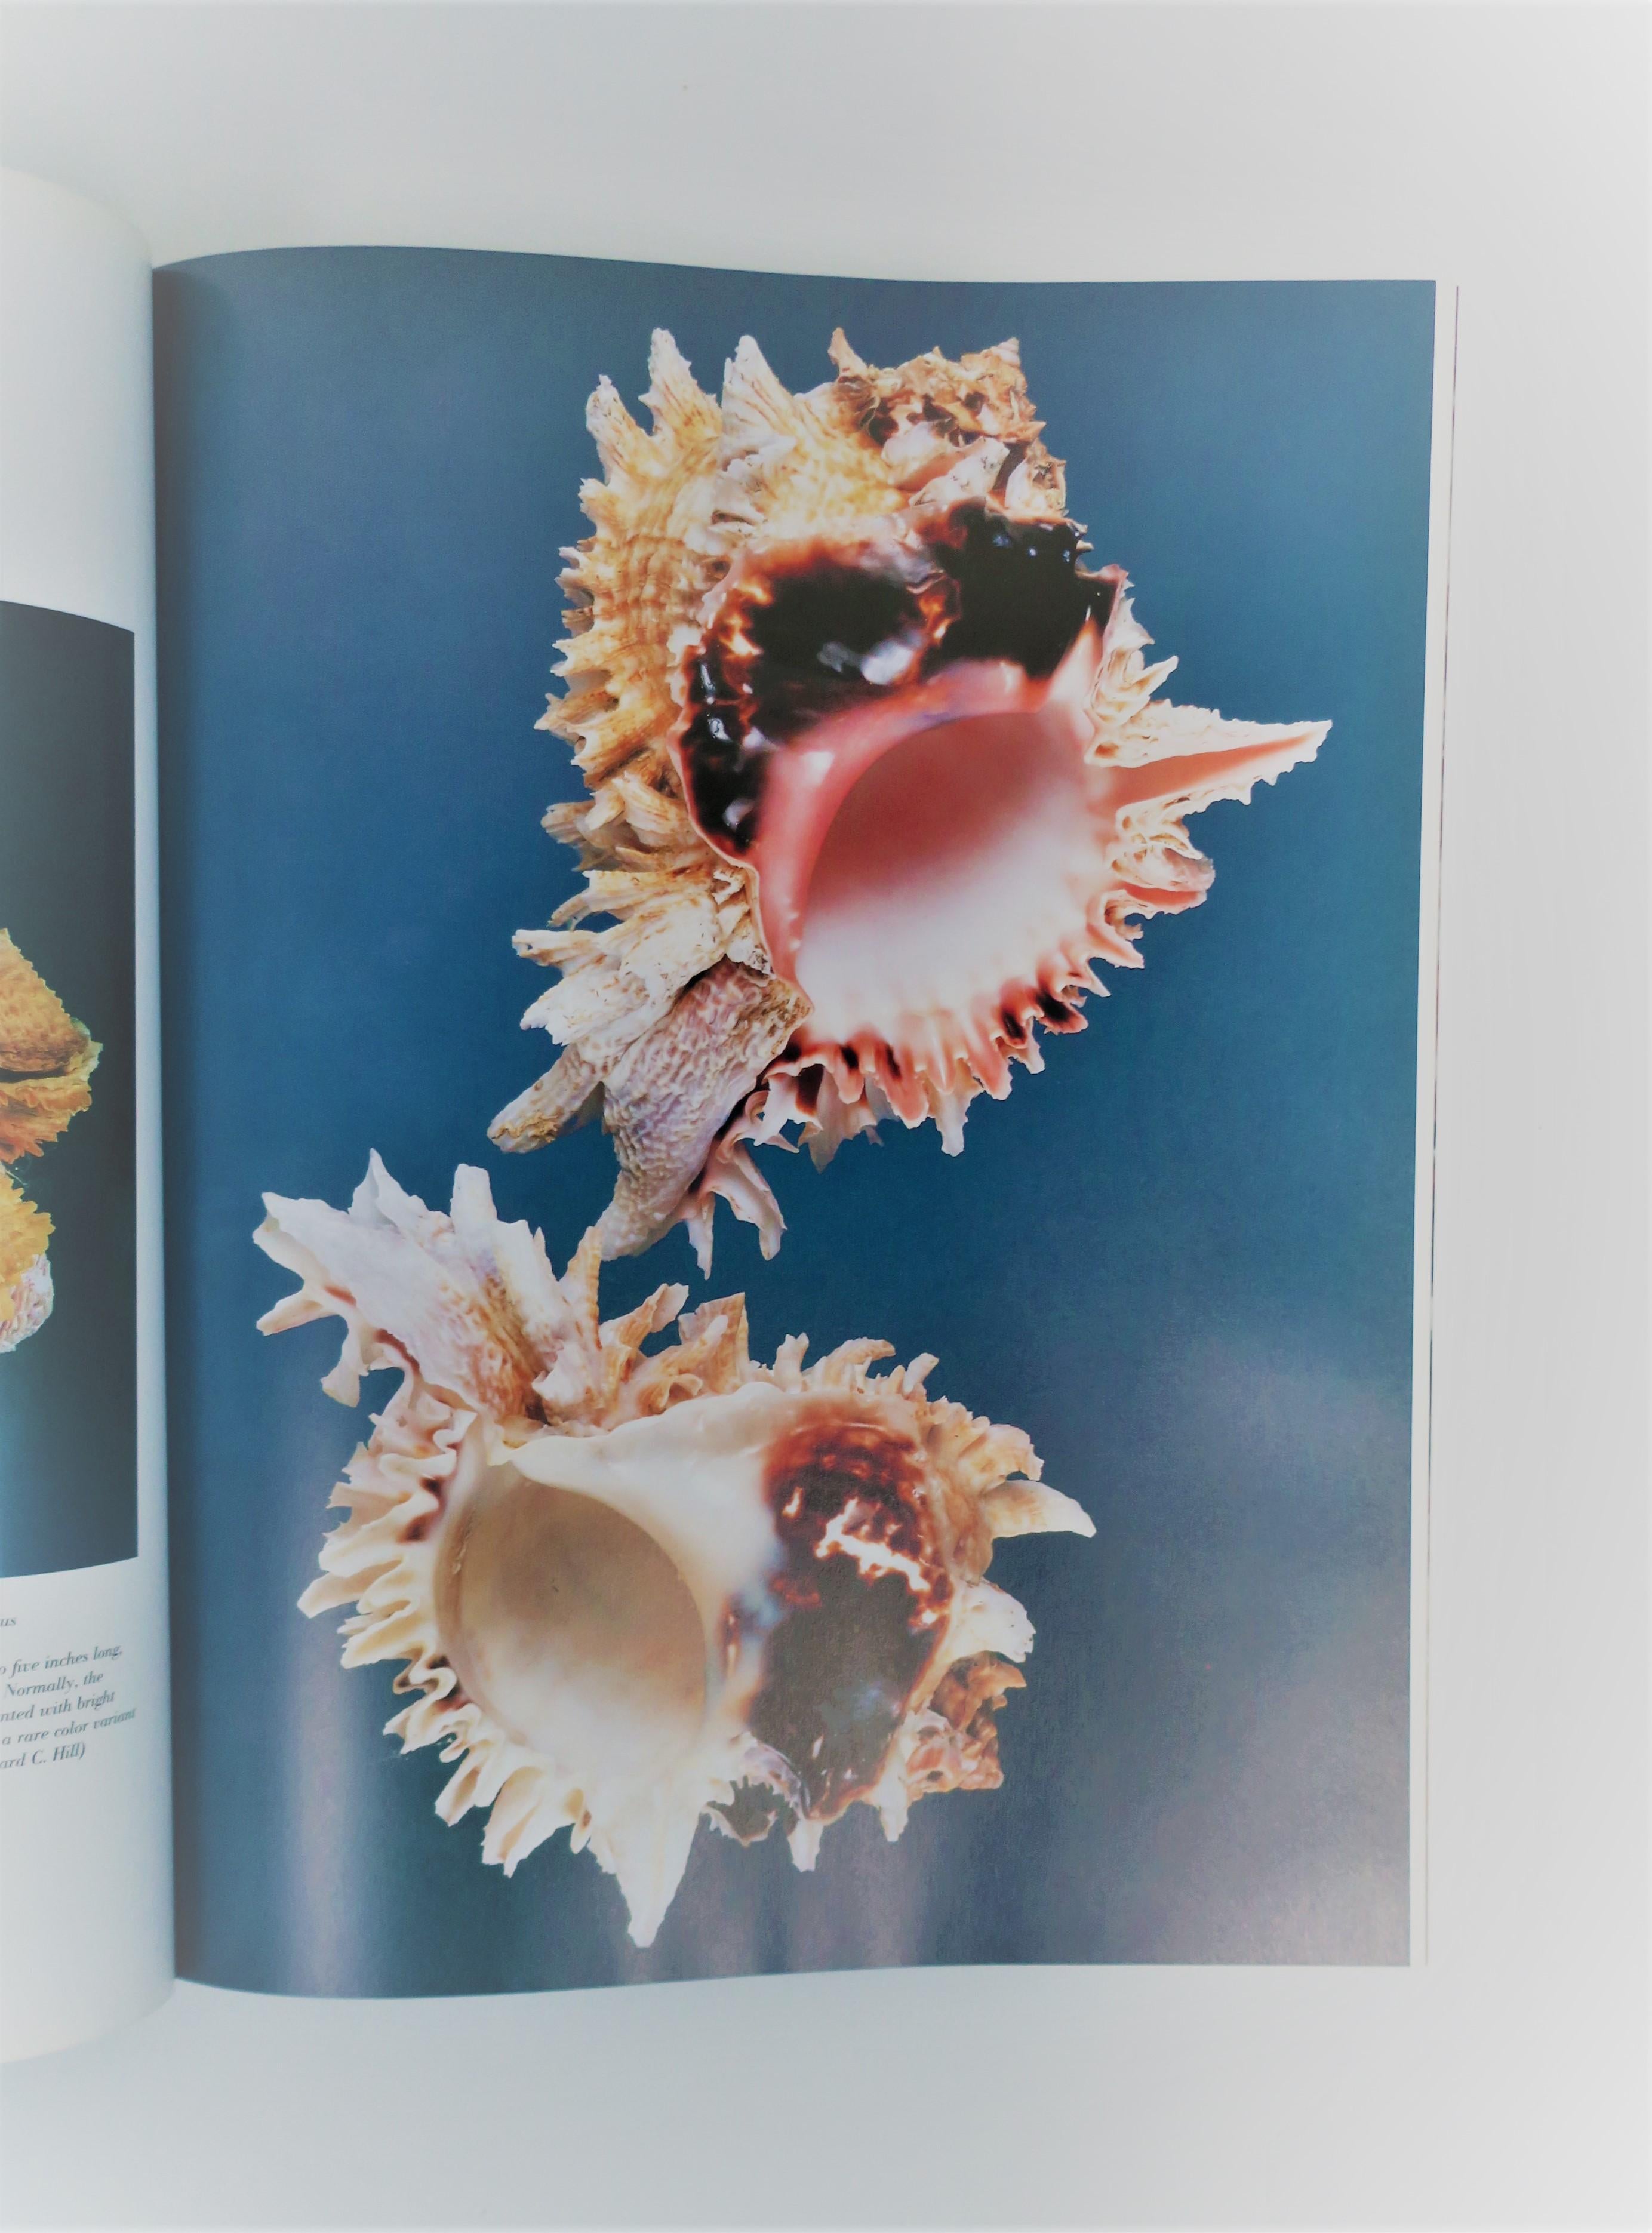 Shells 'Treasures of the Sea' Sea Shell Library or Coffee Table Book, ca. 1990s 5